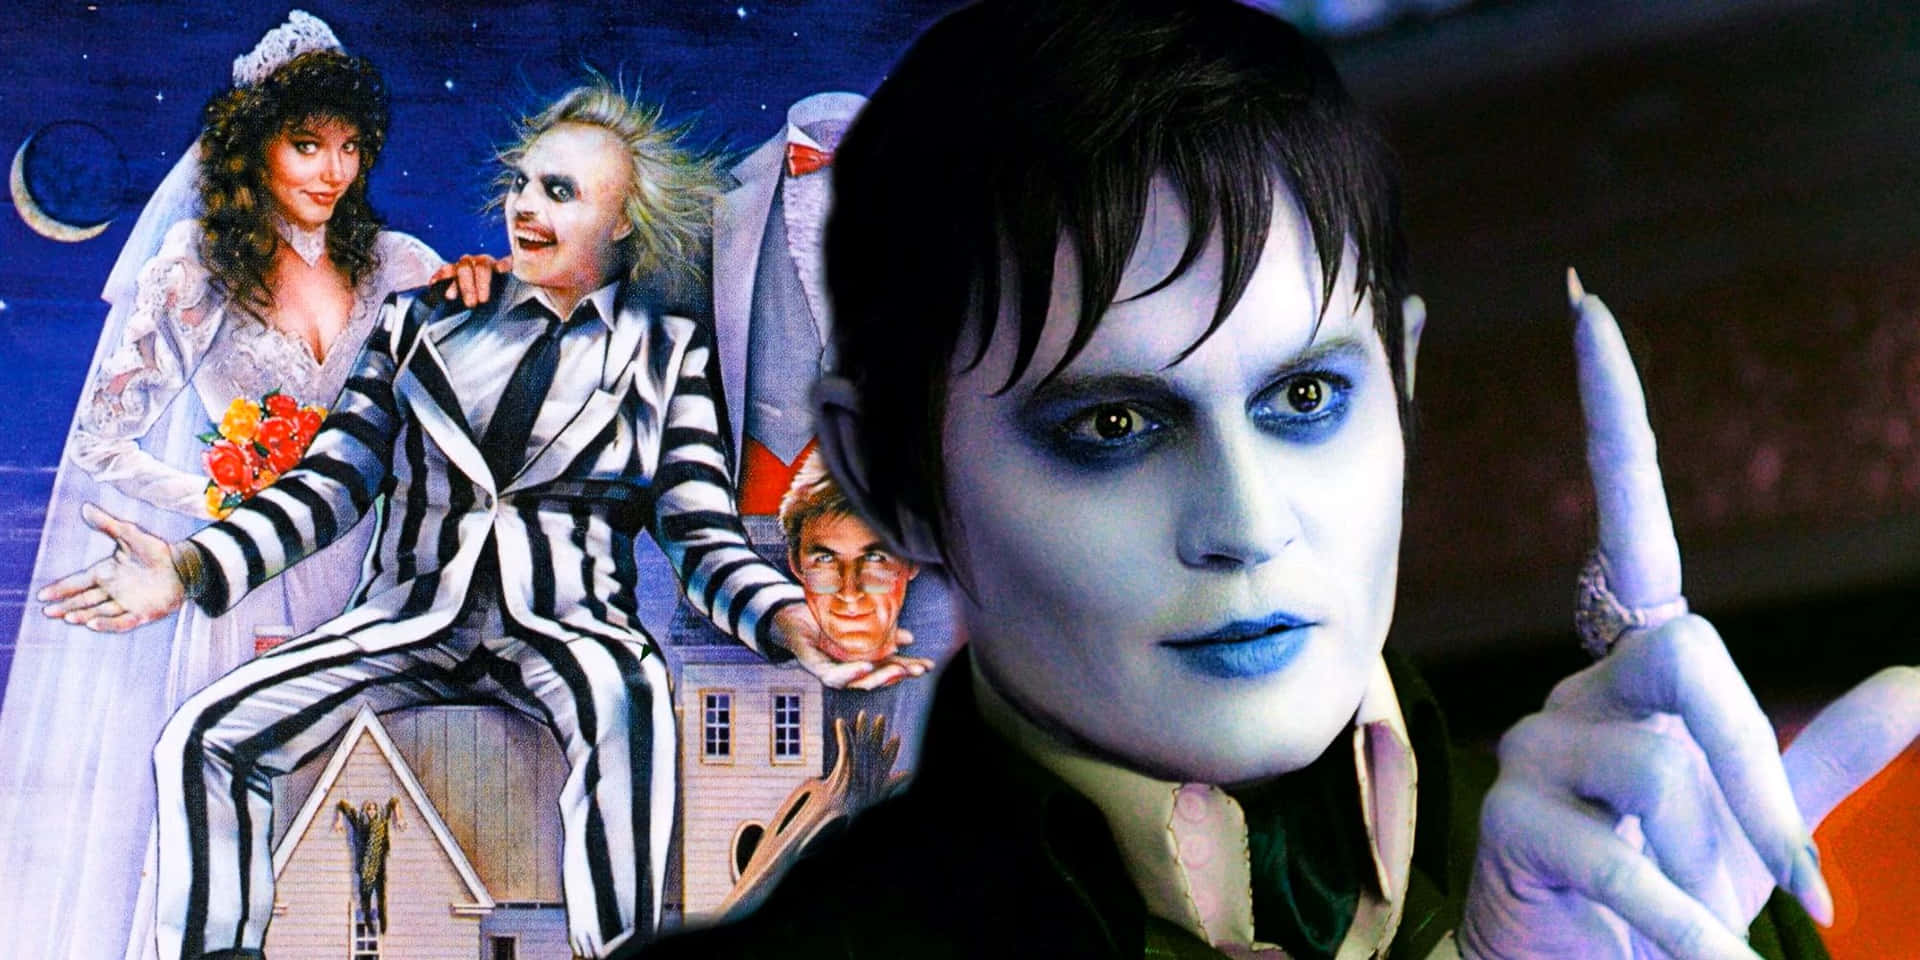 Download Beetlejuice Movie Characters Collage Wallpaper | Wallpapers.com